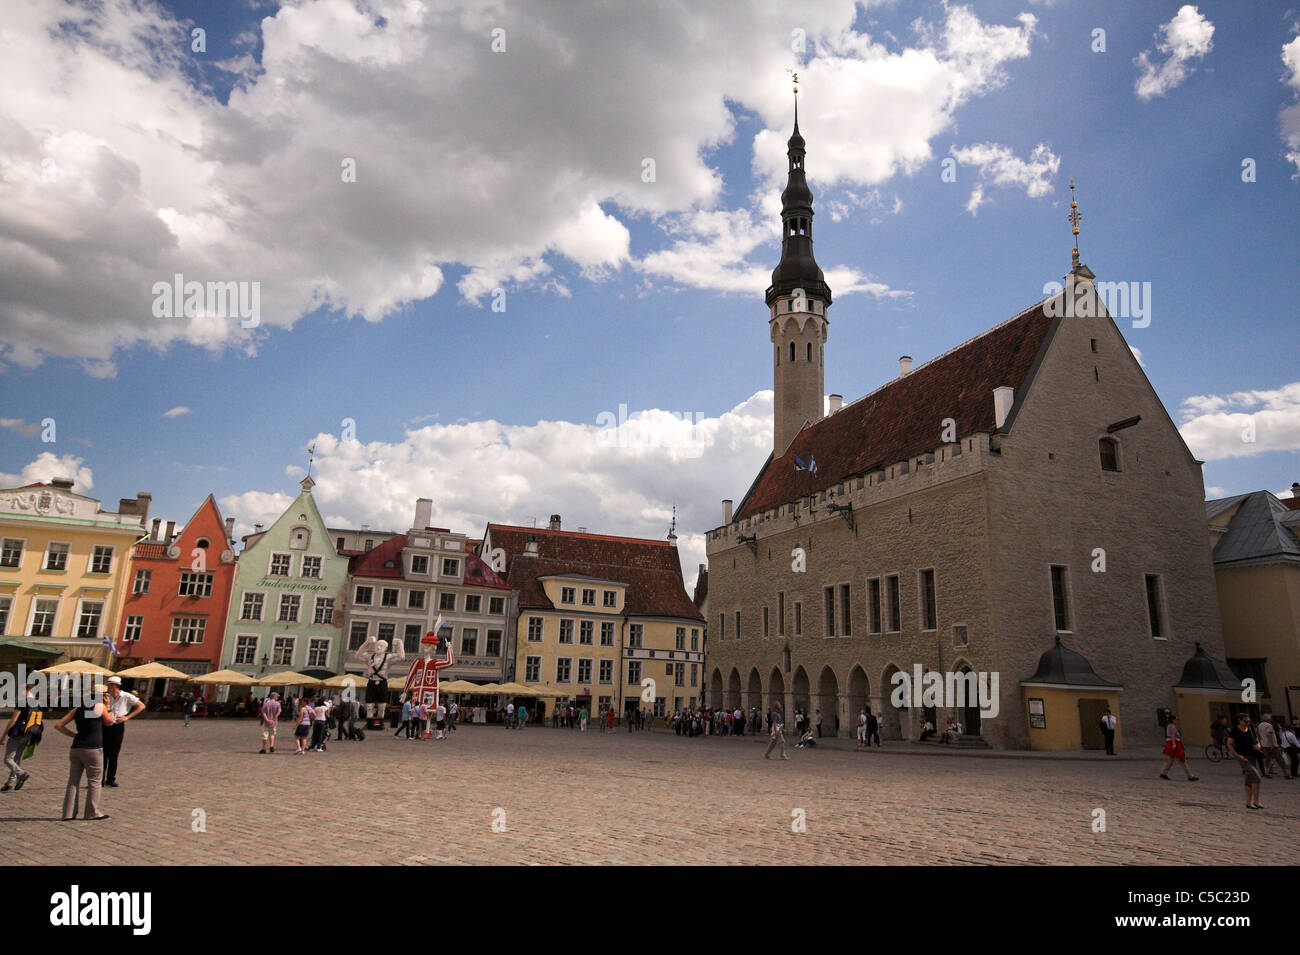 Town Hall building, Town Hall Square in the Old Town, Tallinn, Estonia Stock Photo